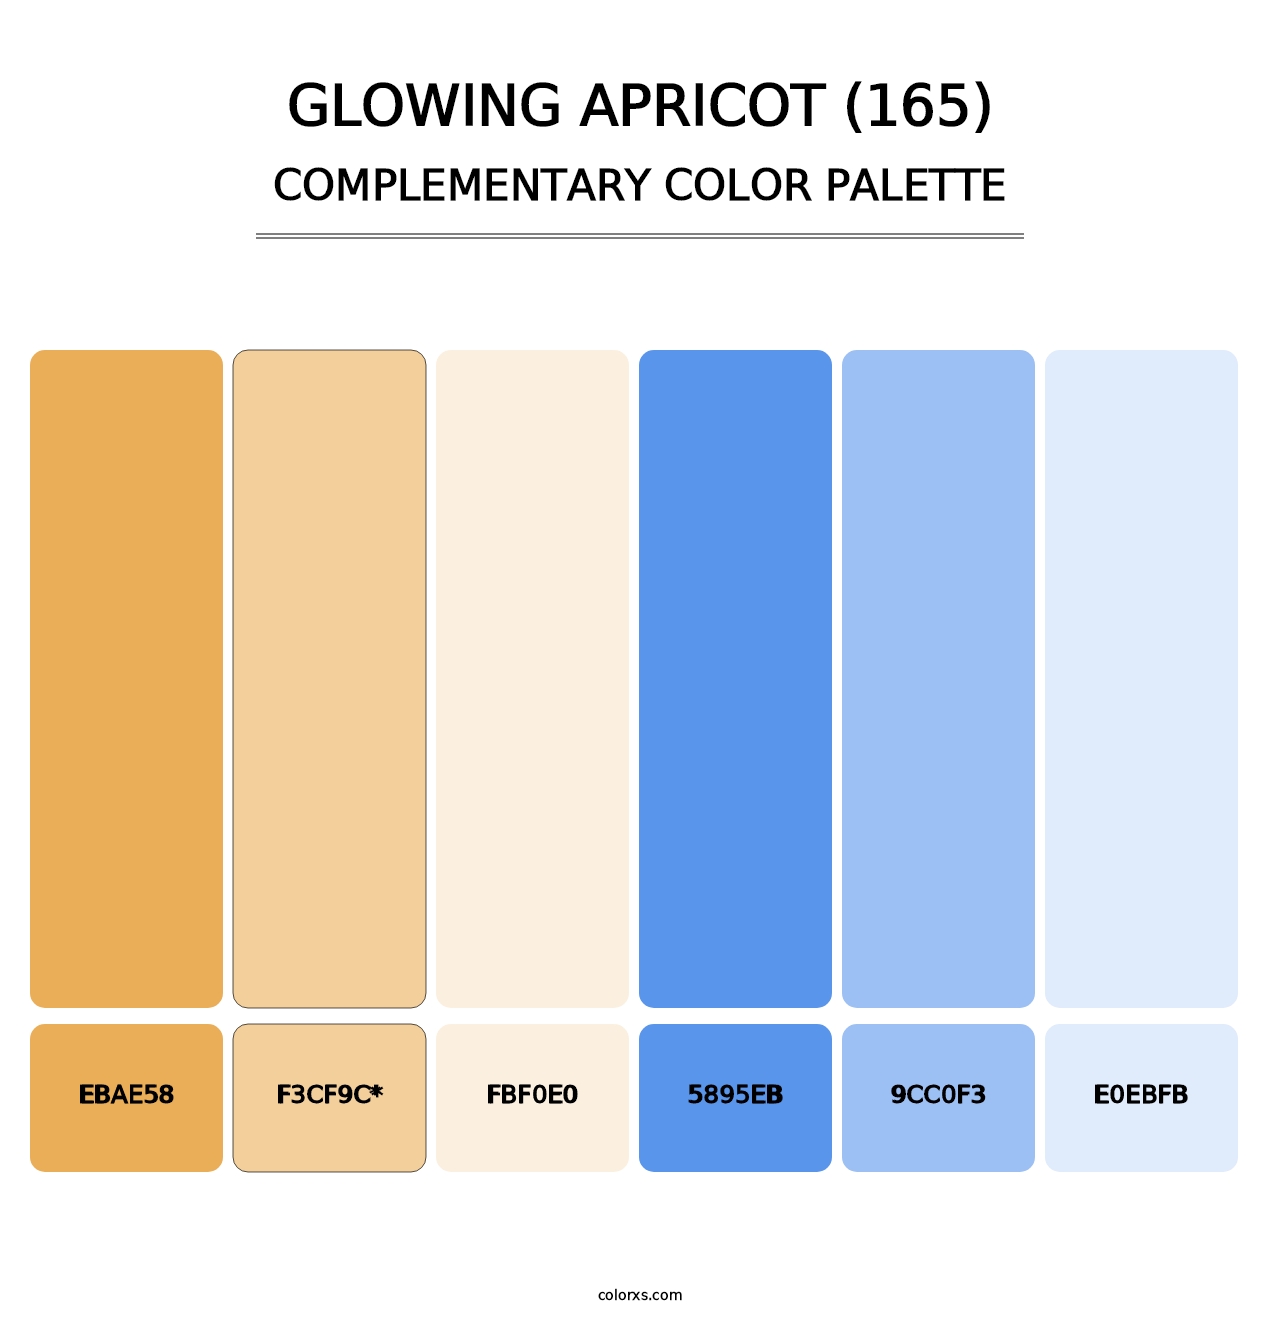 Glowing Apricot (165) - Complementary Color Palette